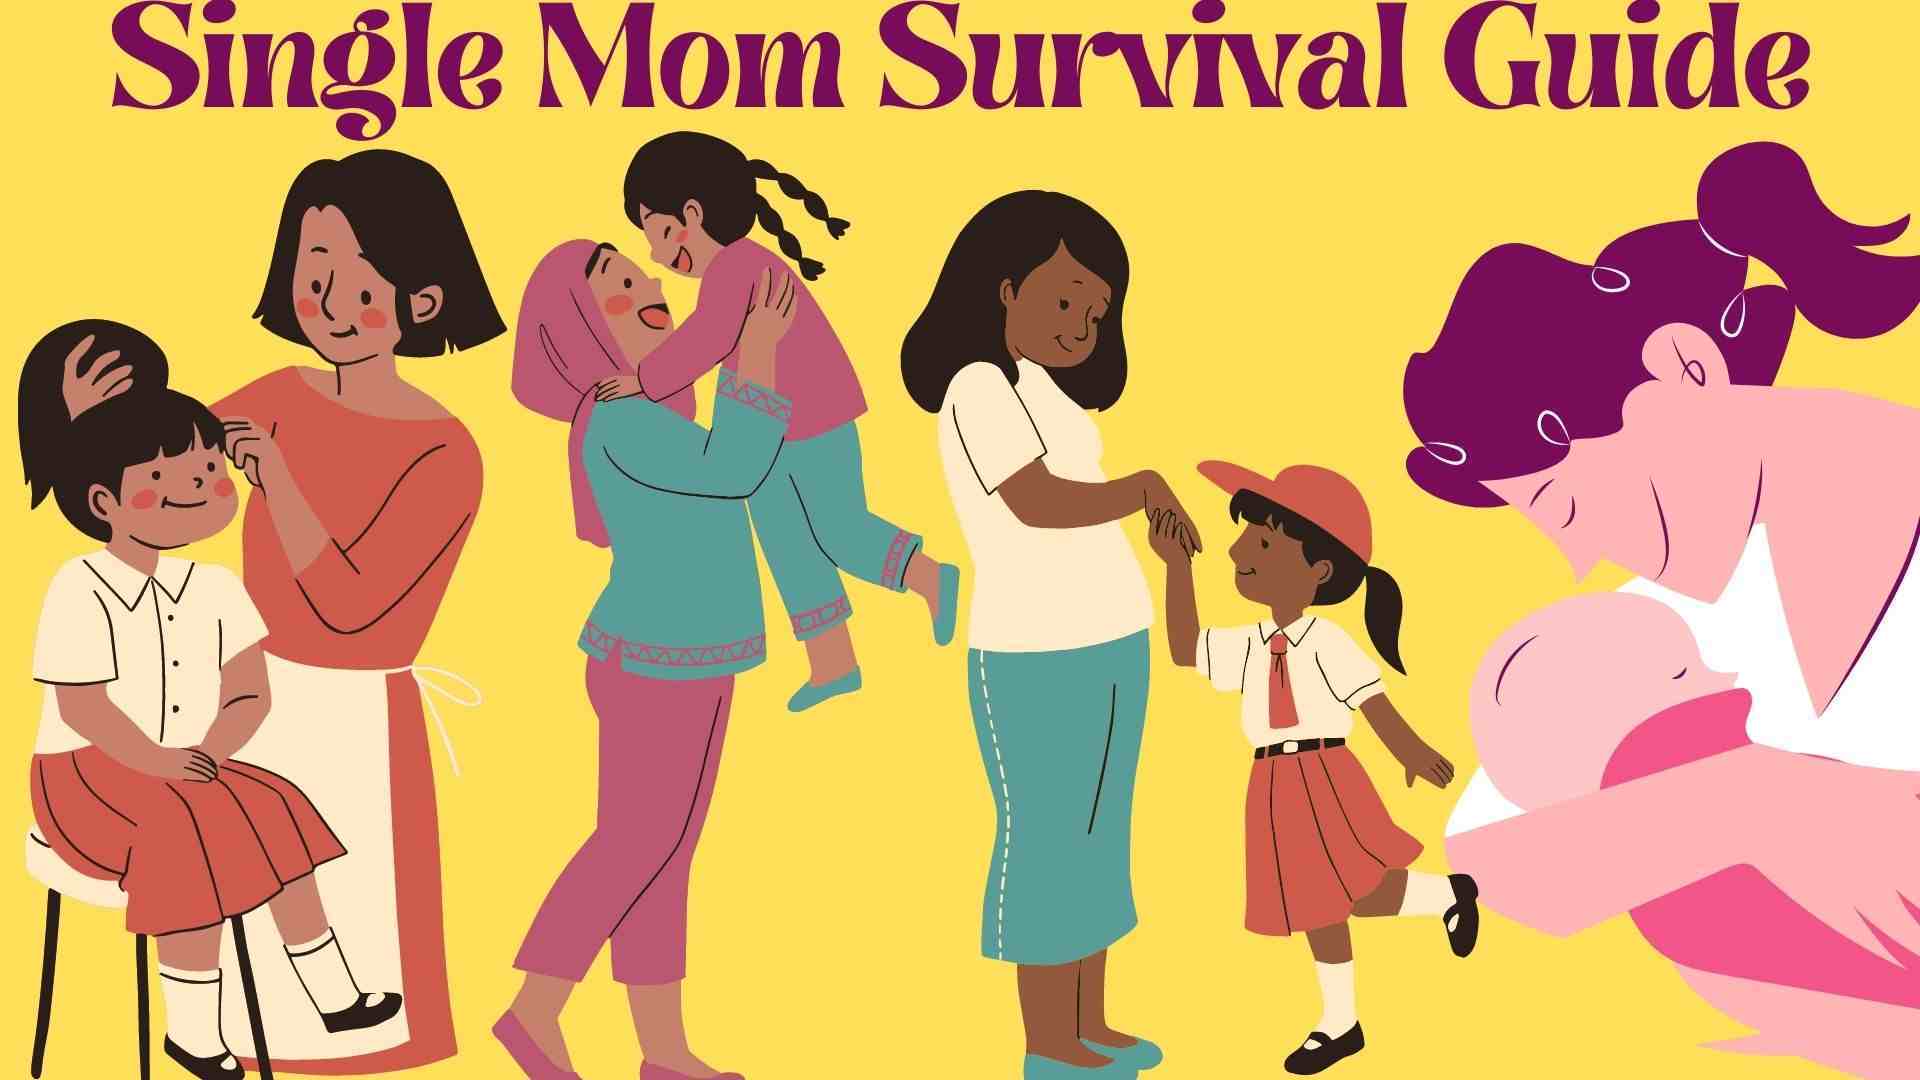 Single Mom Survival Guide wallpaper and images